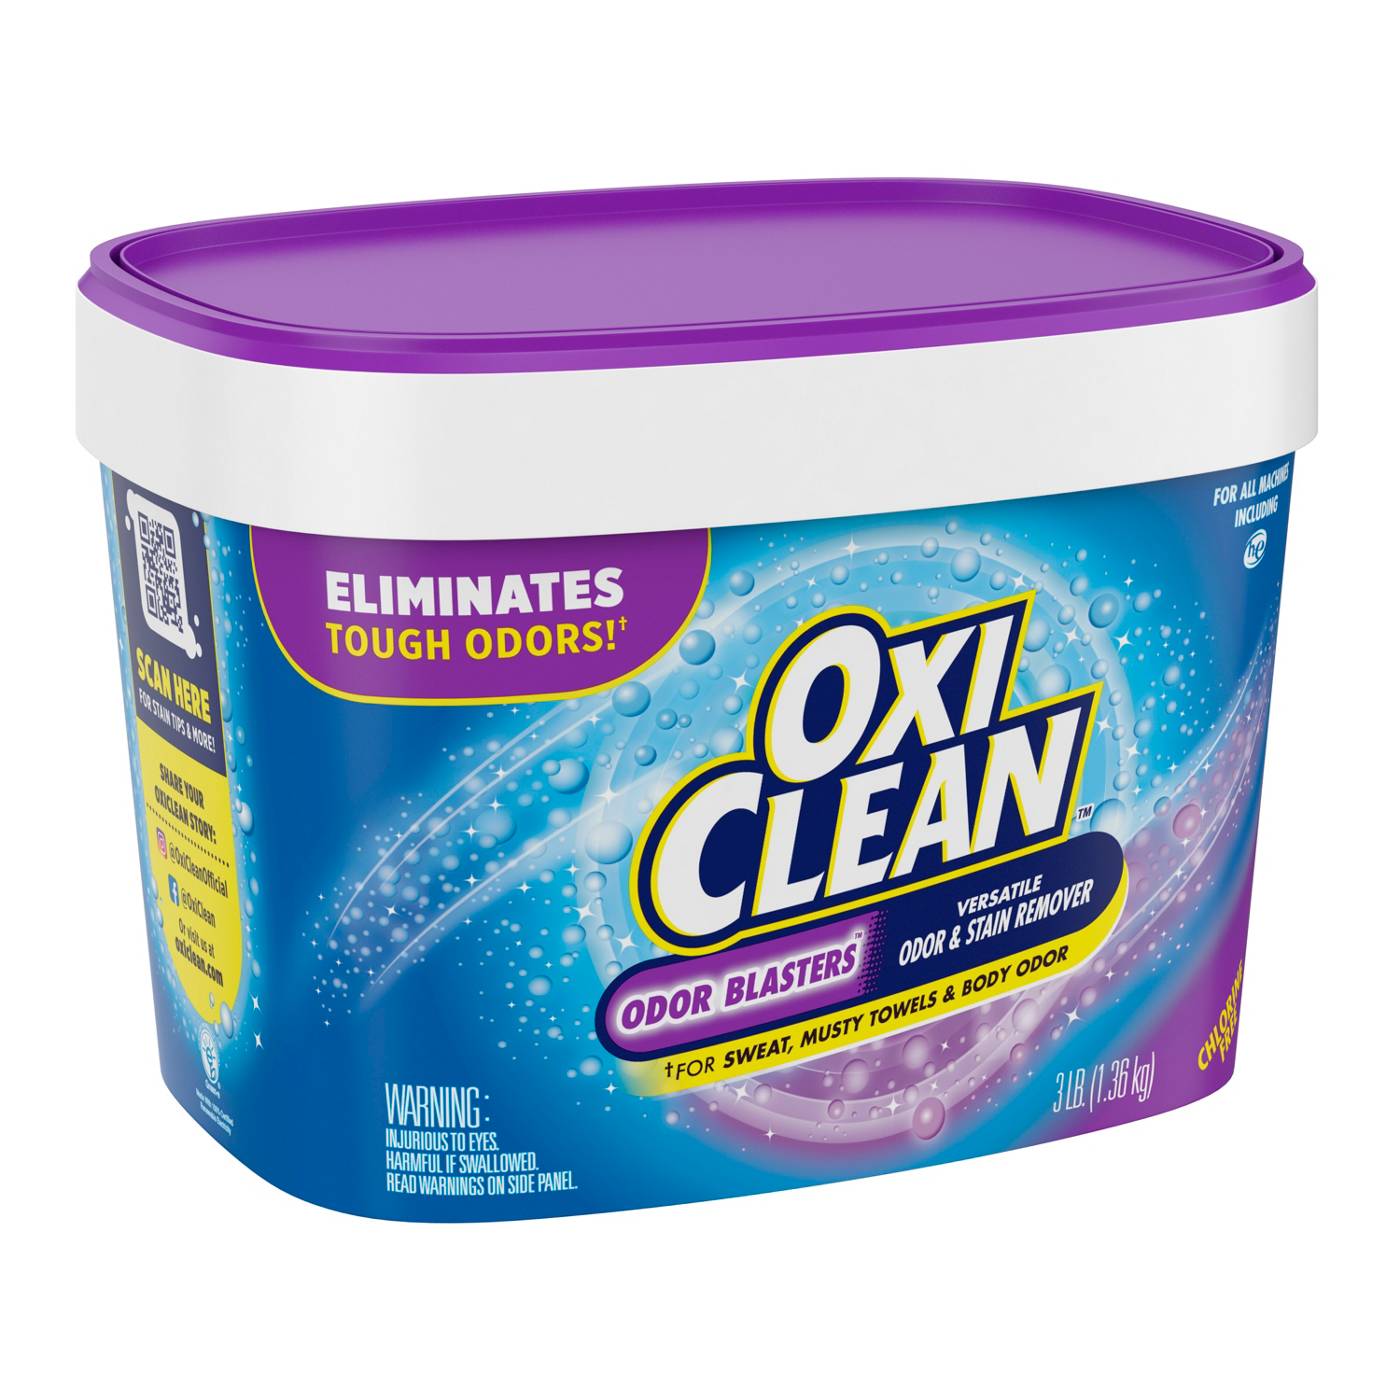 OxiClean Odor Blasters Laundry Stain & Odor Remover; image 2 of 4